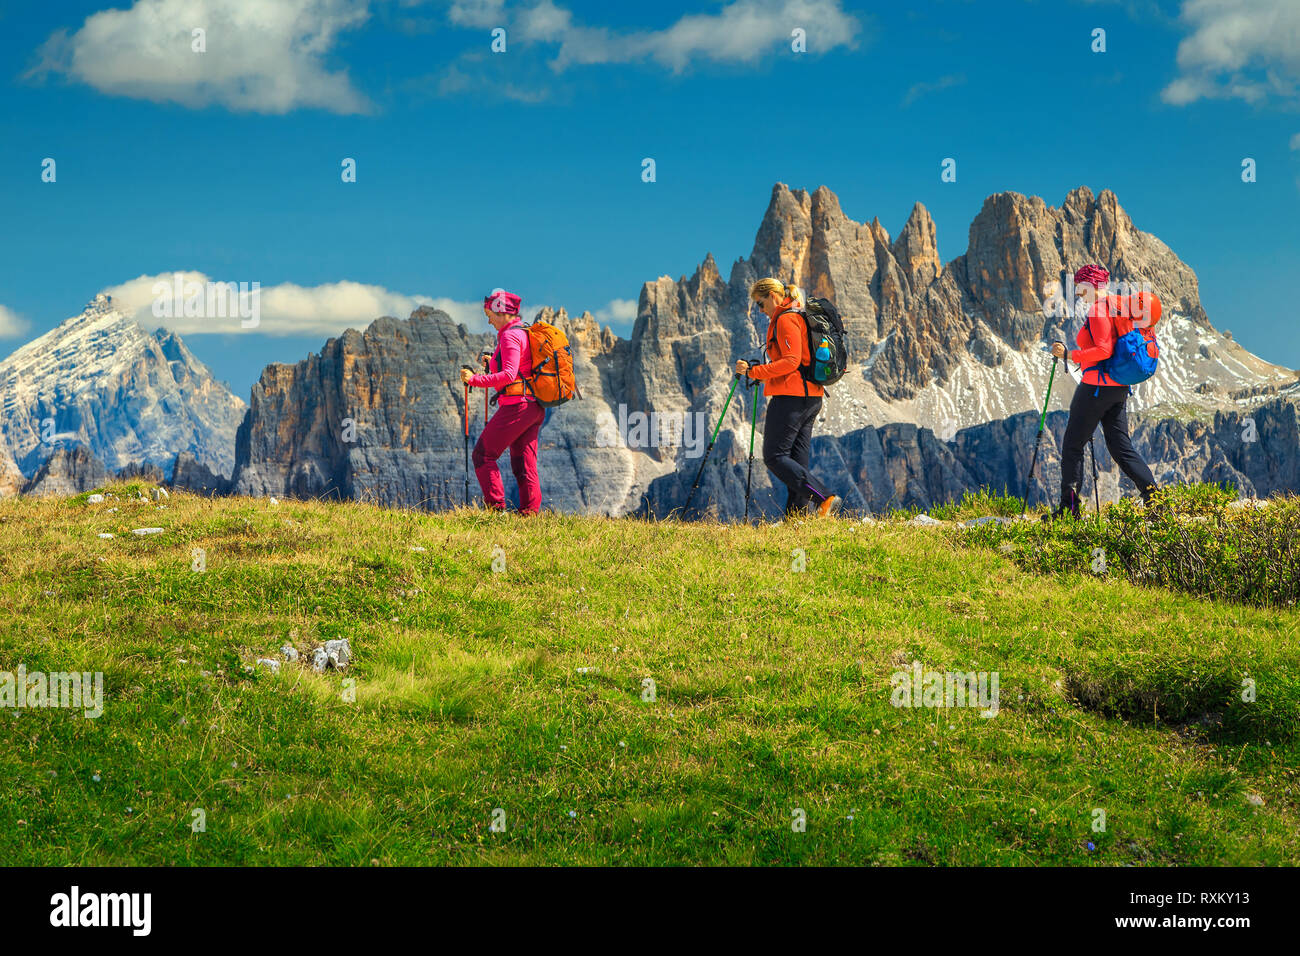 Sporty healthy active woman group of hikers with colorful backpacks and mountain equipment walking on the mountain ridge, Dolomites, Italy, Europe Stock Photo